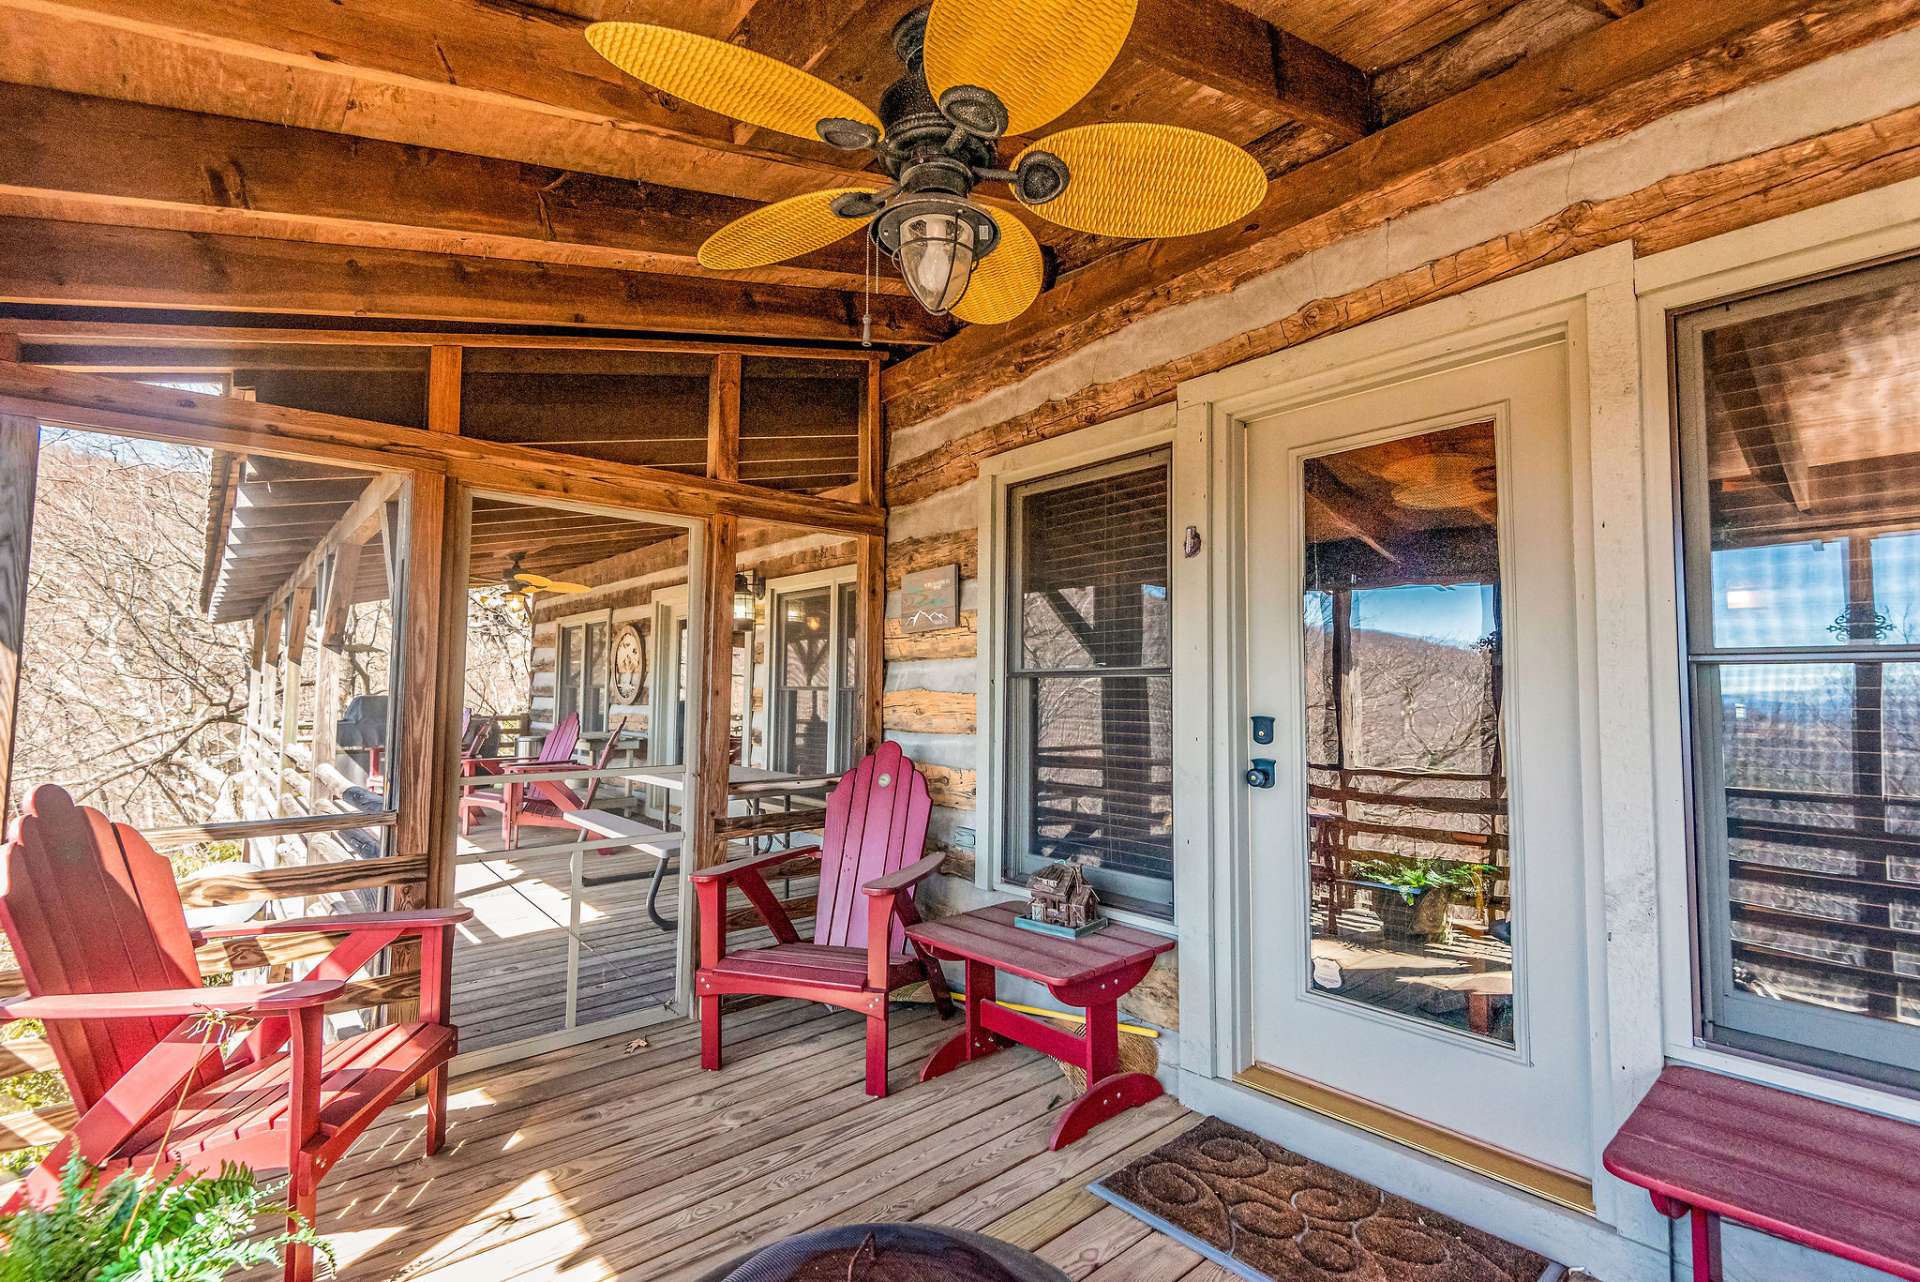 Deck fans will help keep the cool air moving on the slow August days on the mountain.